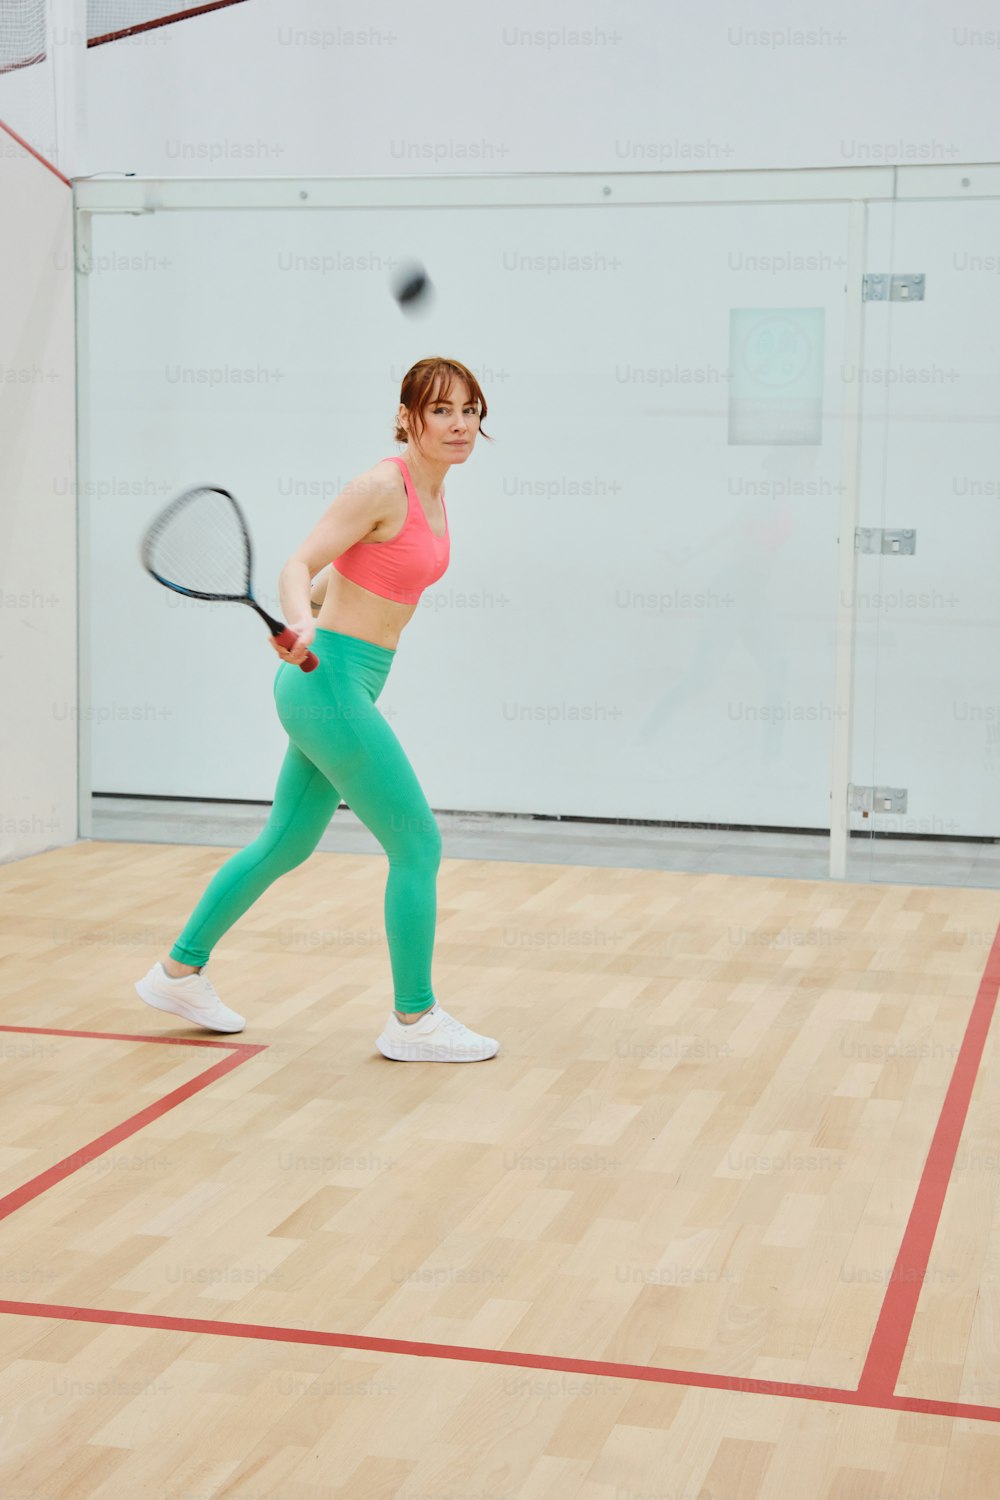 a woman is playing tennis on a hard wood floor